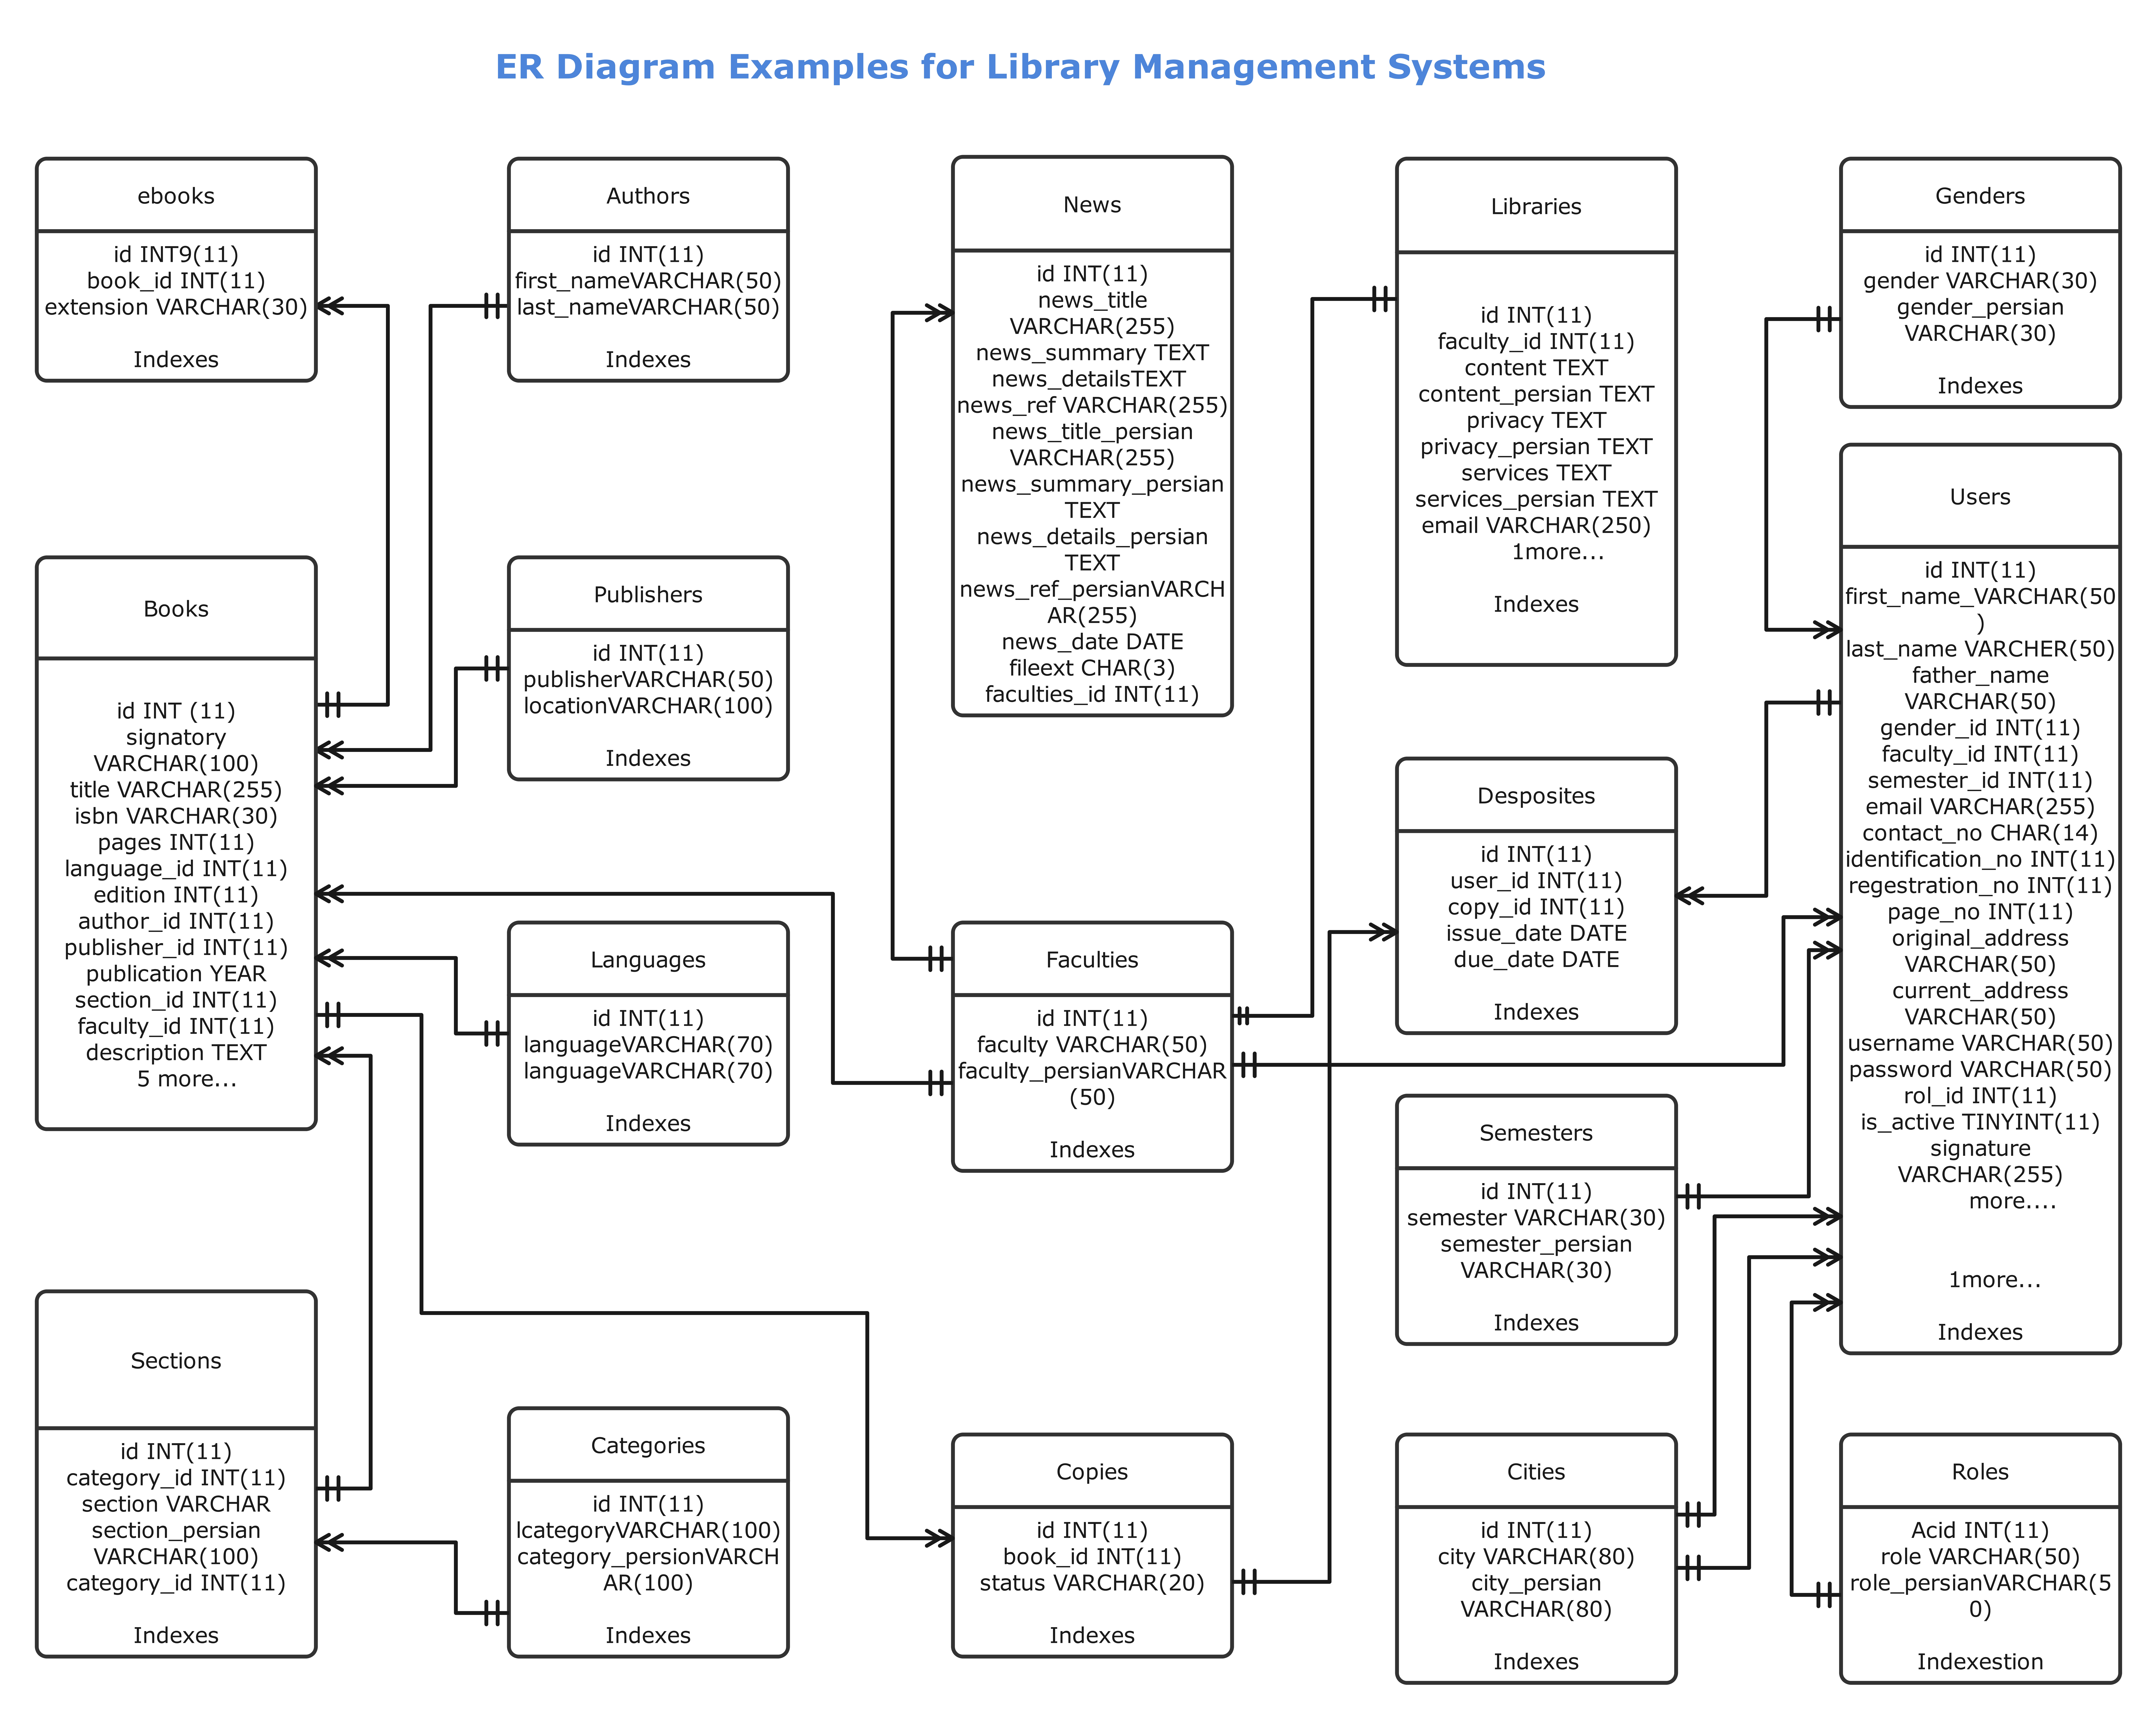 er-diagram-library-management-example-3